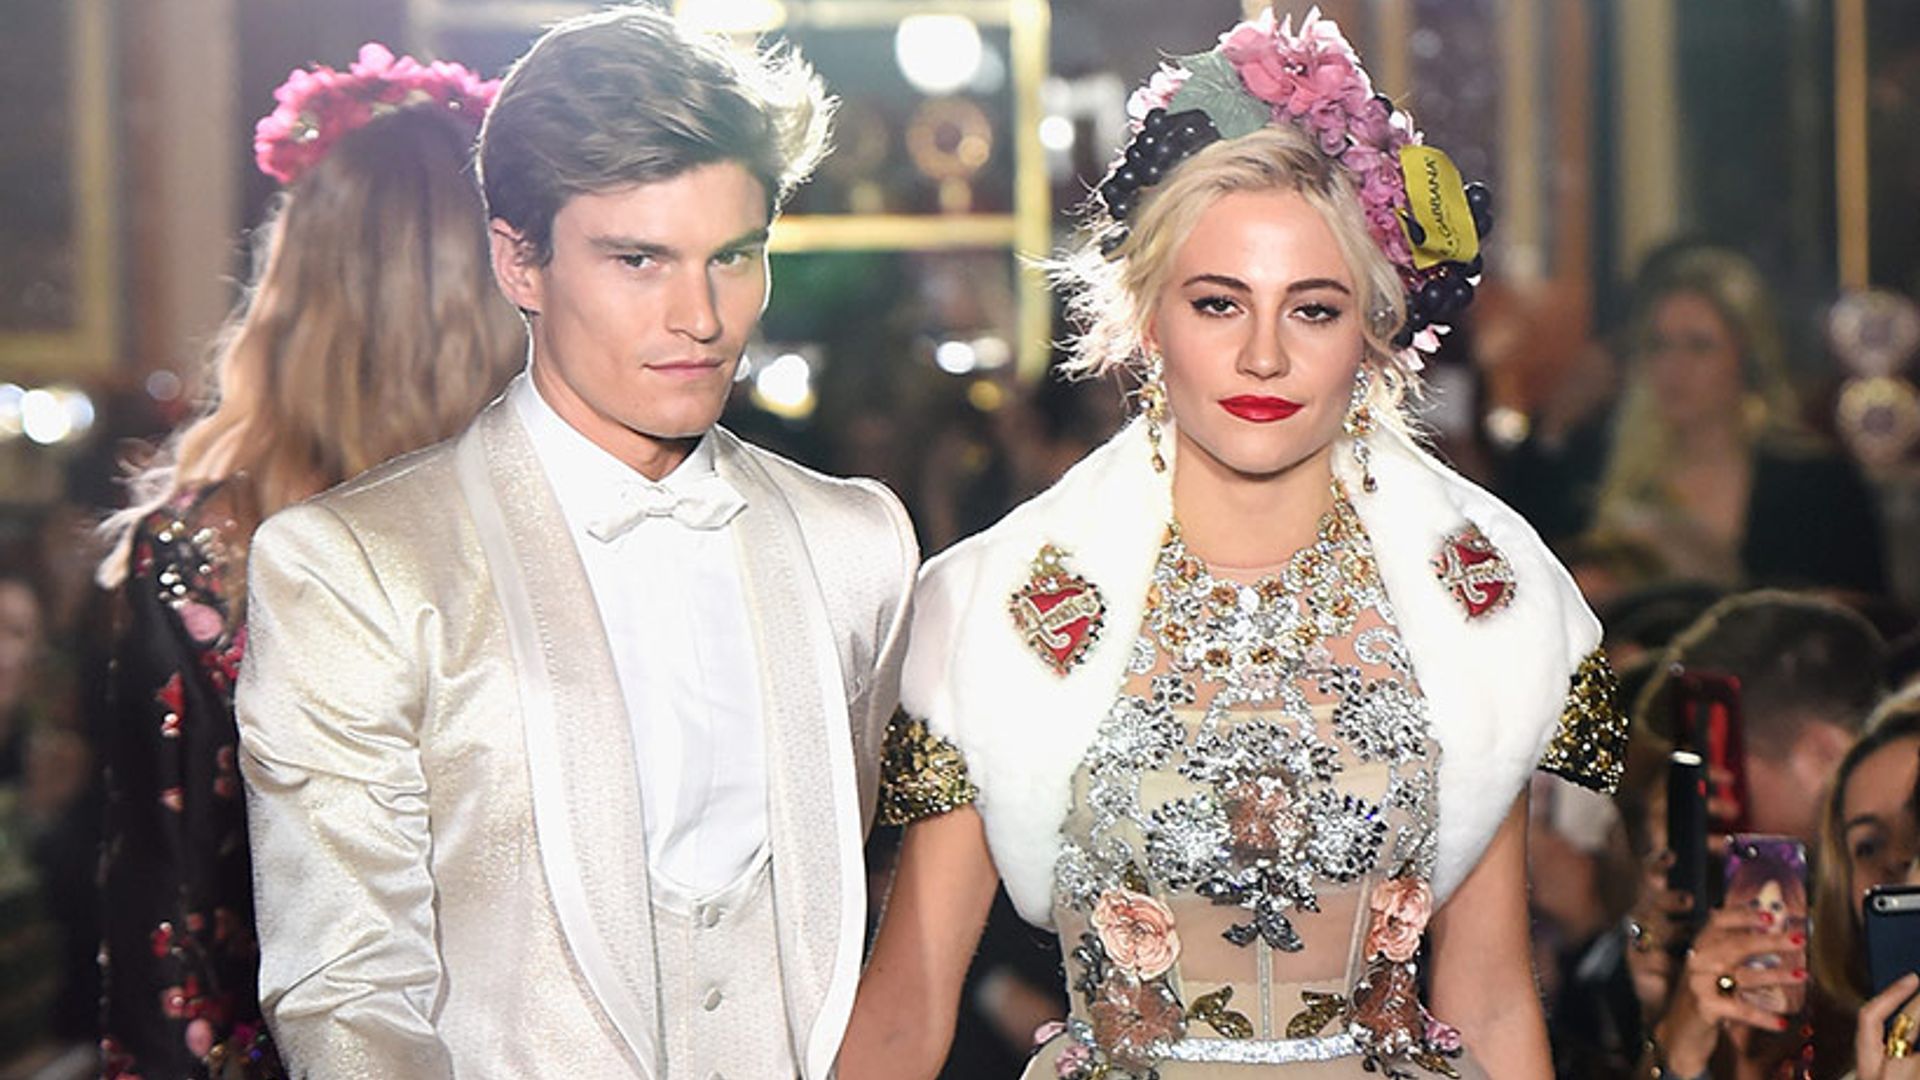 Pixie Lott and Lady Kitty Spencer join star-studded Dolce & Gabbana show at Harrods